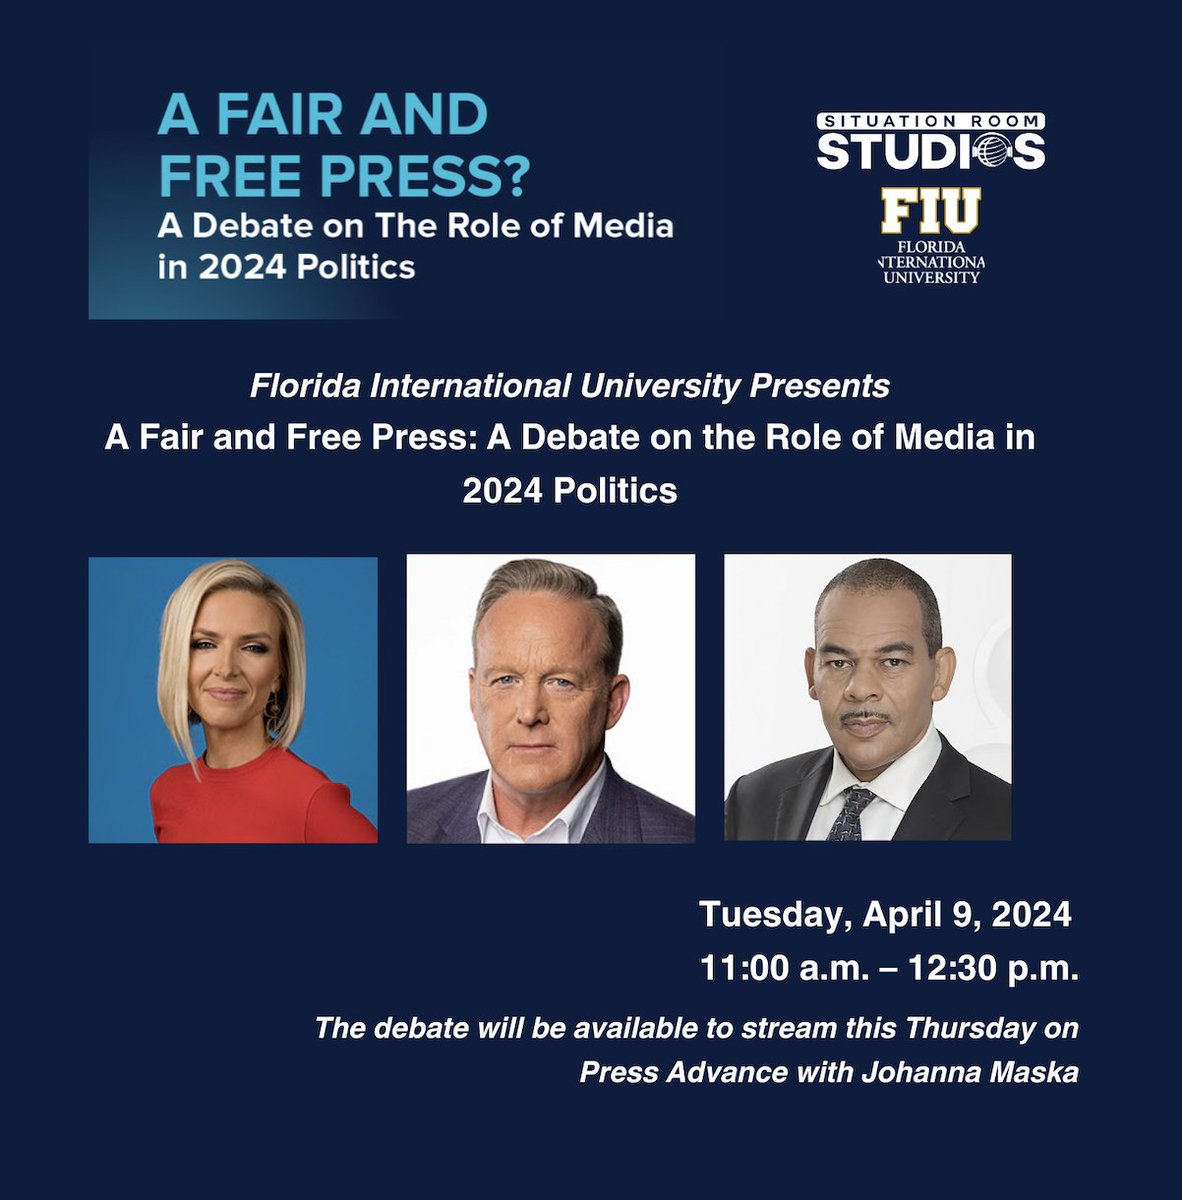 Our CEO @JohannaMaska will be joined by @seanspicer and @WillardNBC6 for a debate on the role of media in the 2024 elections. This event is hosted by the #FloridaInternationalUniversity and will be available on the #PressAdvance podcast this Thursday.